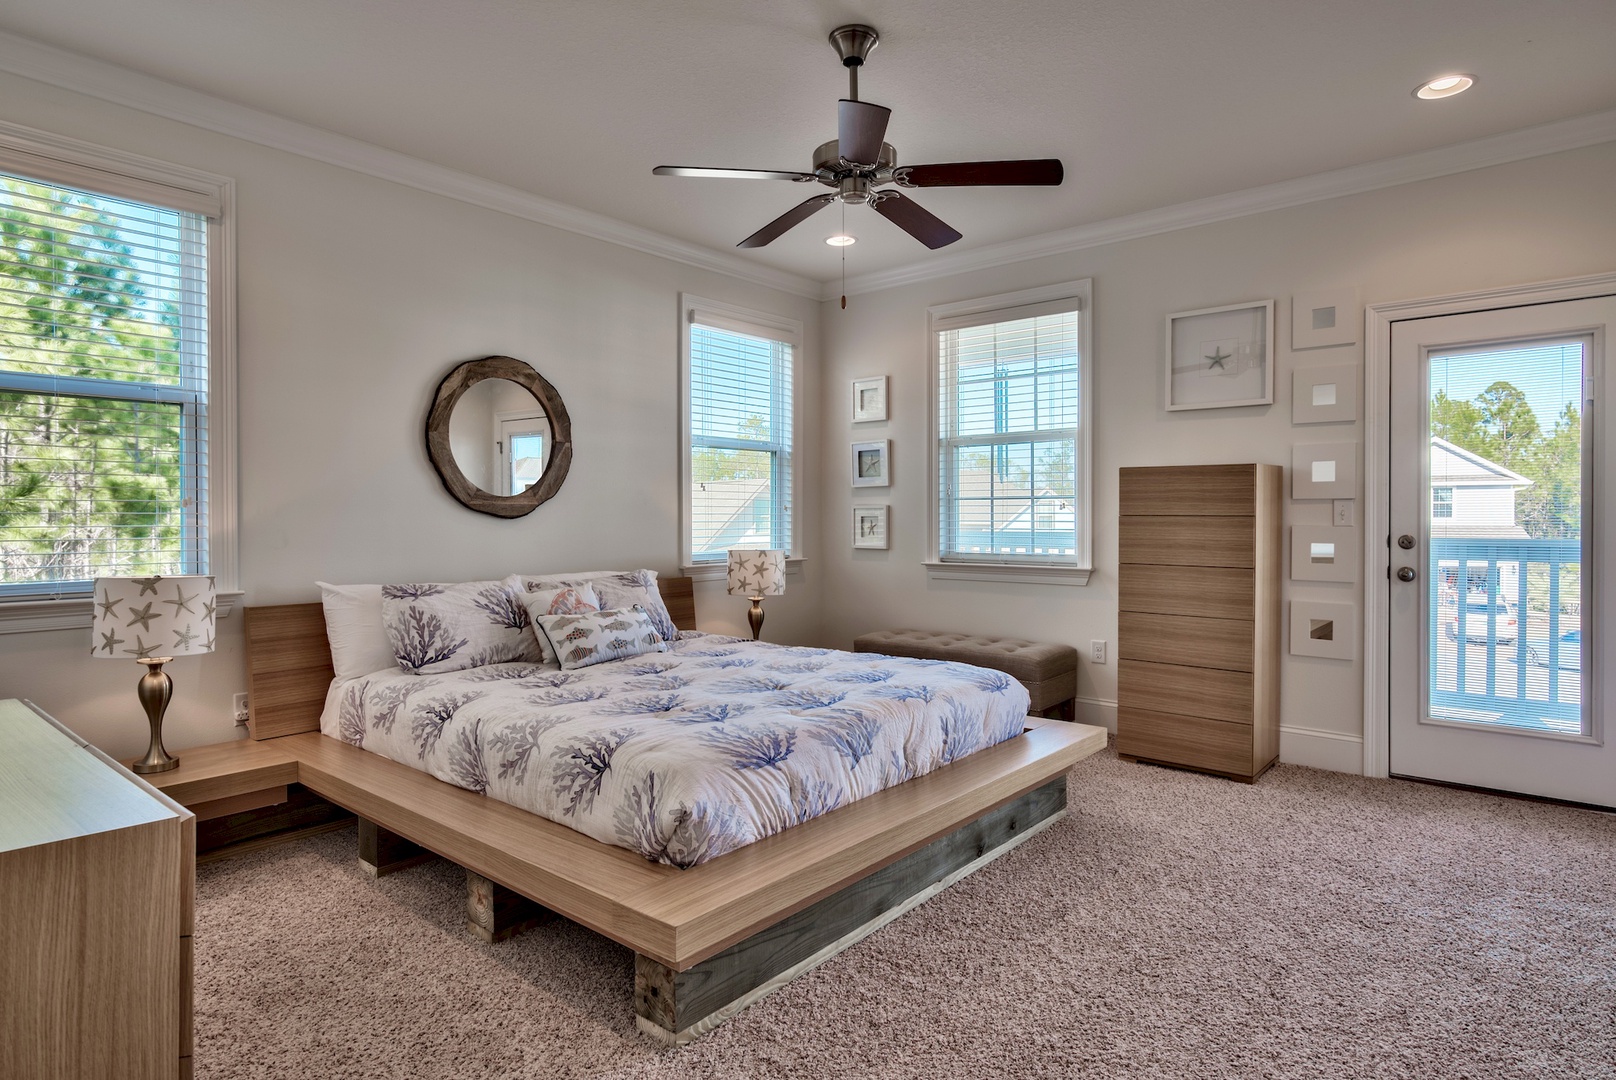 The master bedroom features a king-size platform bed, private bathroom, and private balcony!